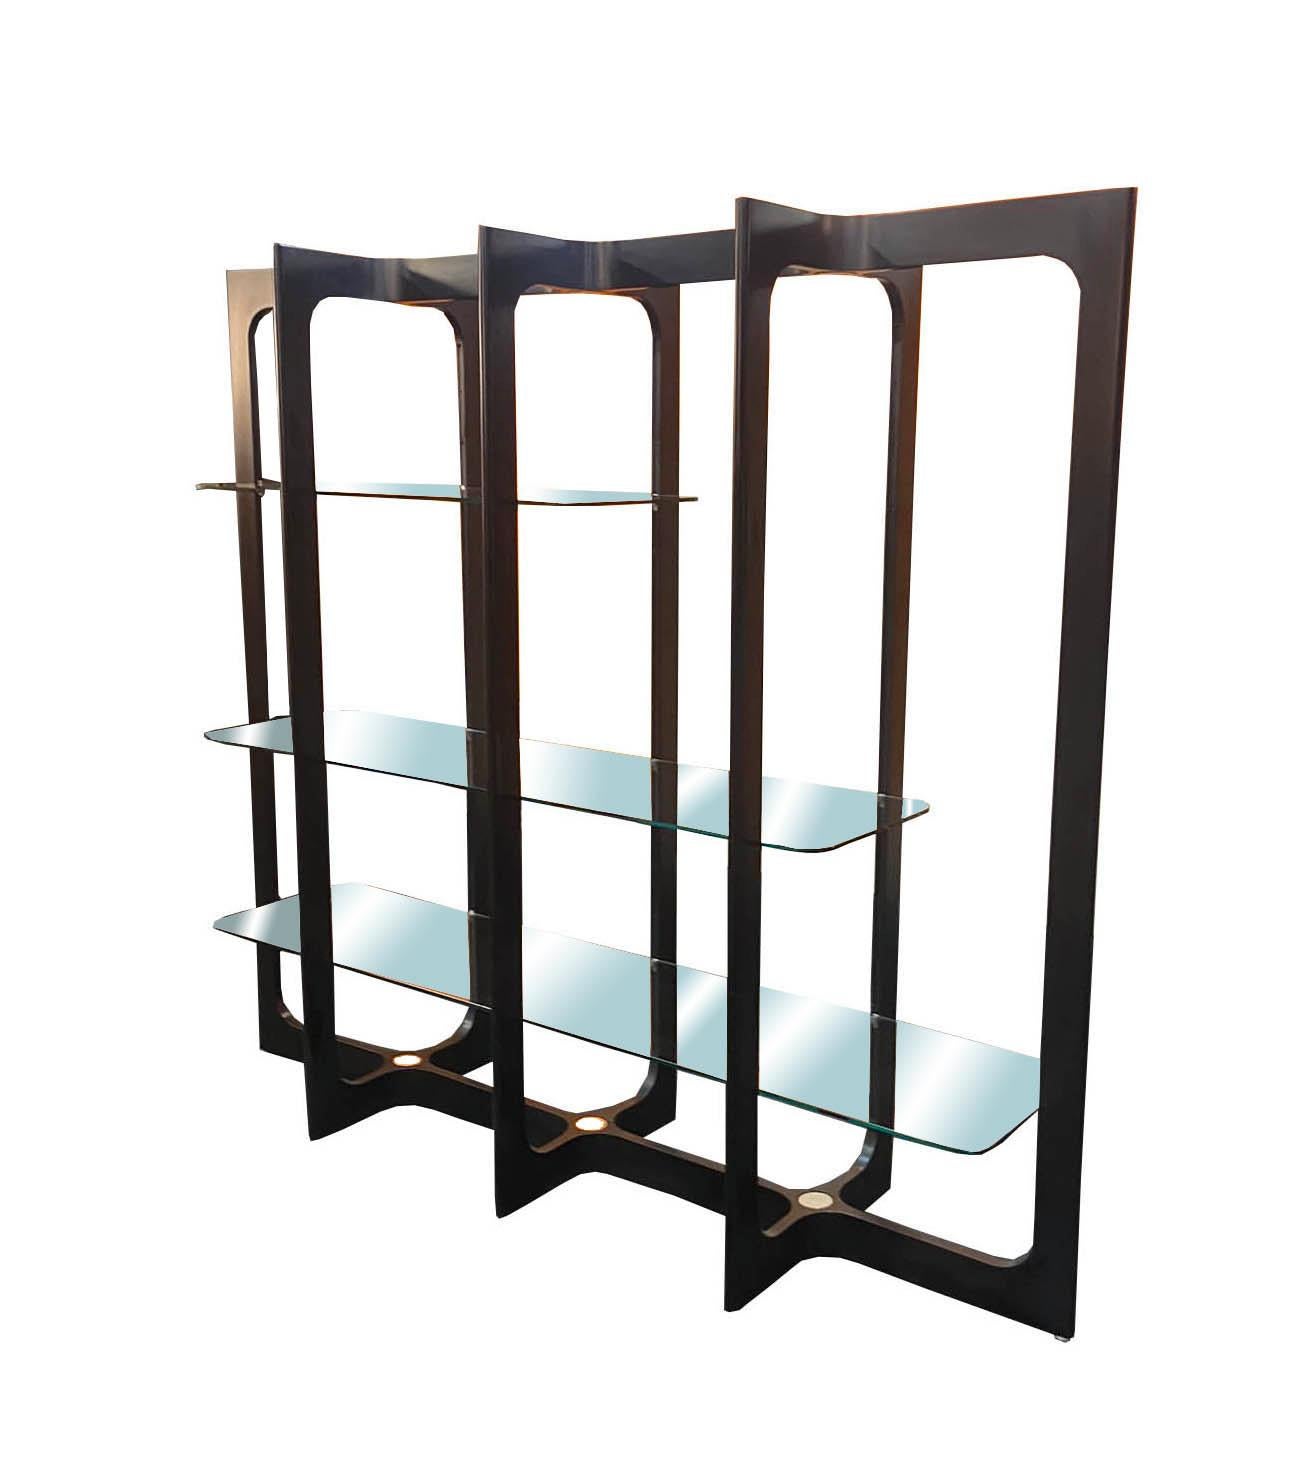 Etagere, bookcase or room divider from the 1970s made of black curved solid wood, 3 glass shelves and round chrome-plated steel supports. Its lines create a rhythm and a geometric design. Production Bernini, Italy 1970.